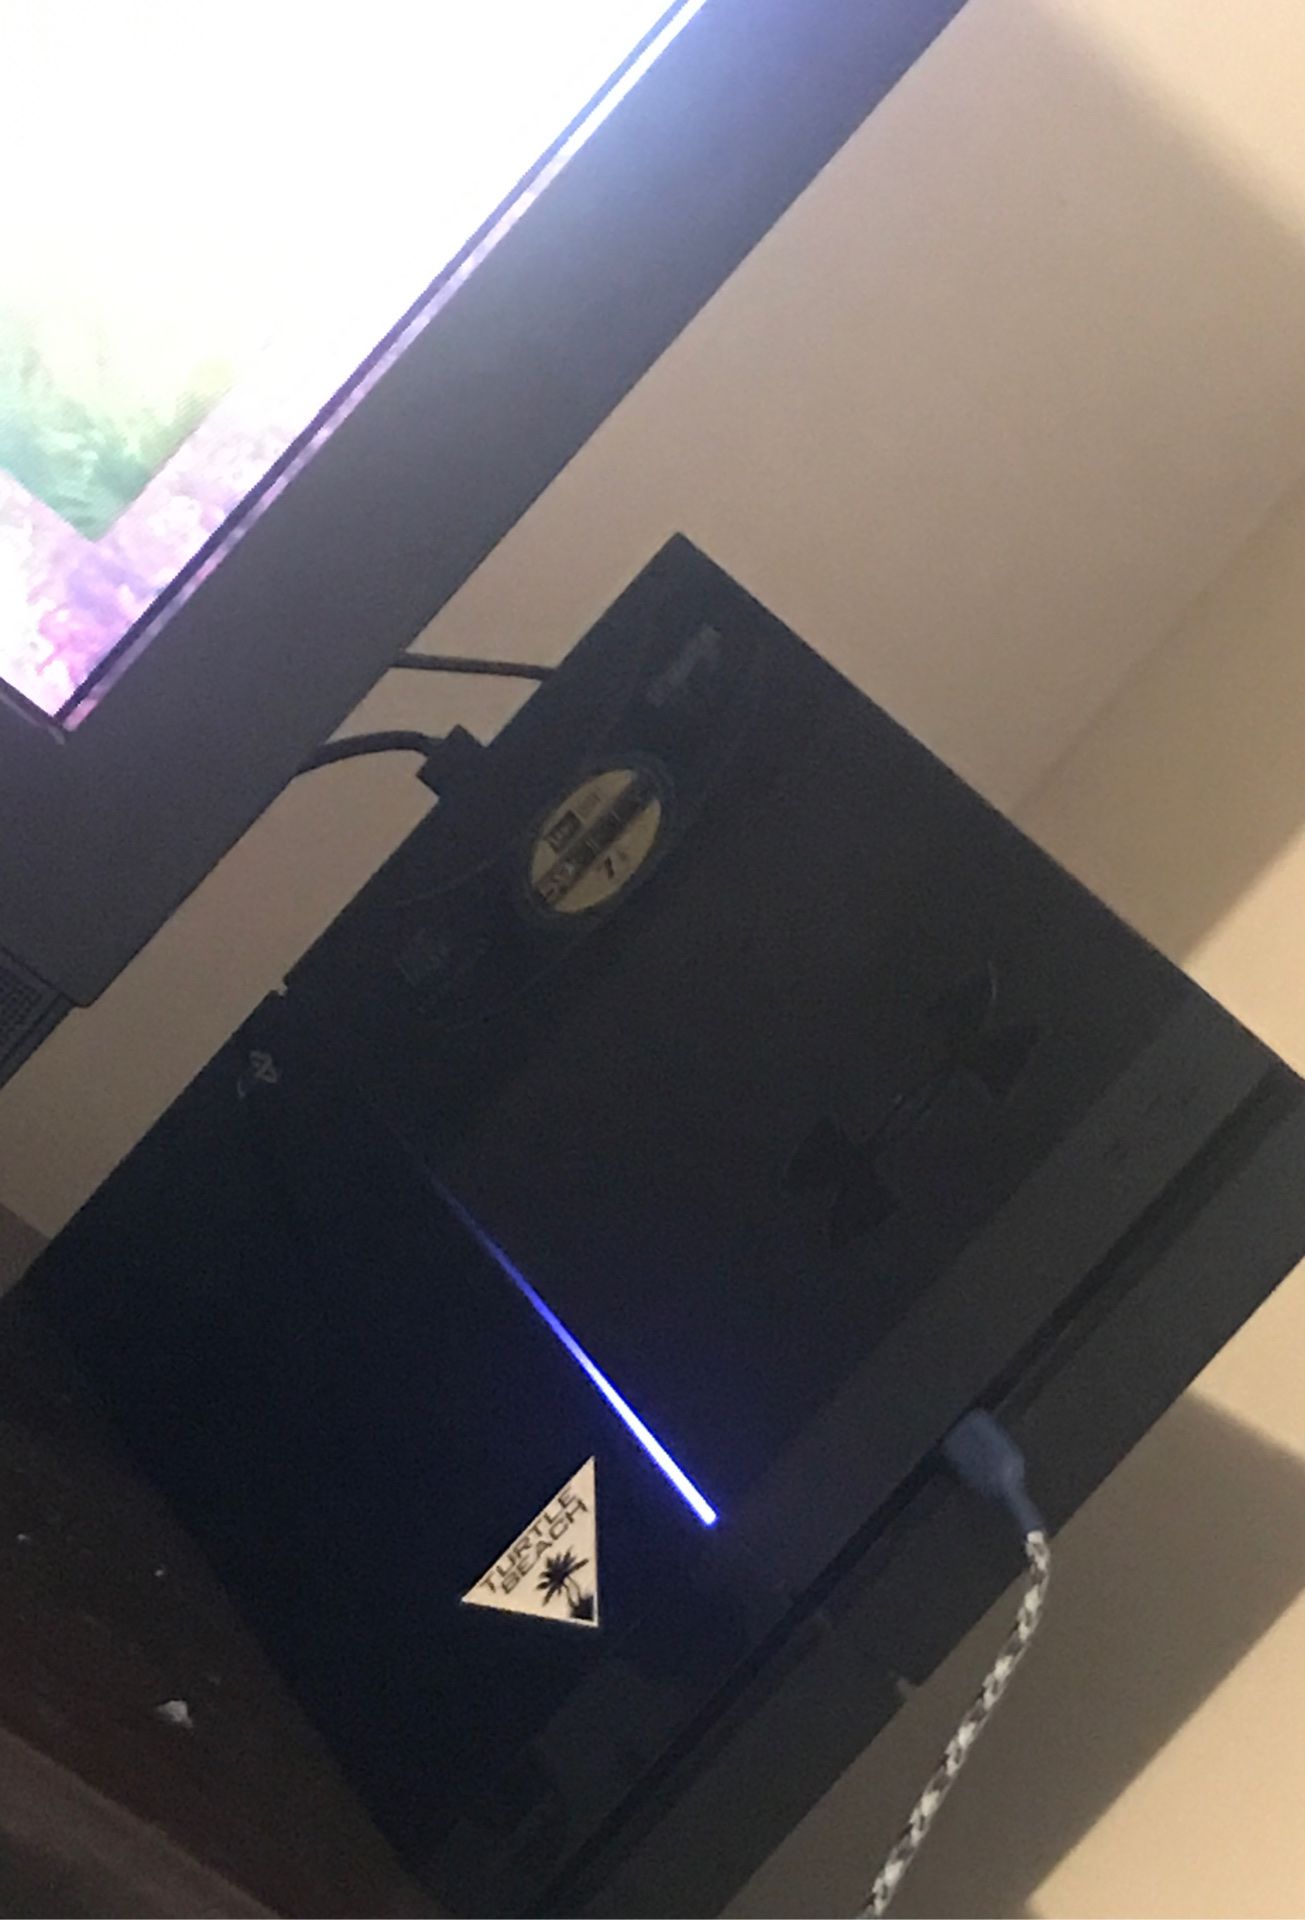 Sell ps4 I want a gaming pc great condition and just bought controller a week ago